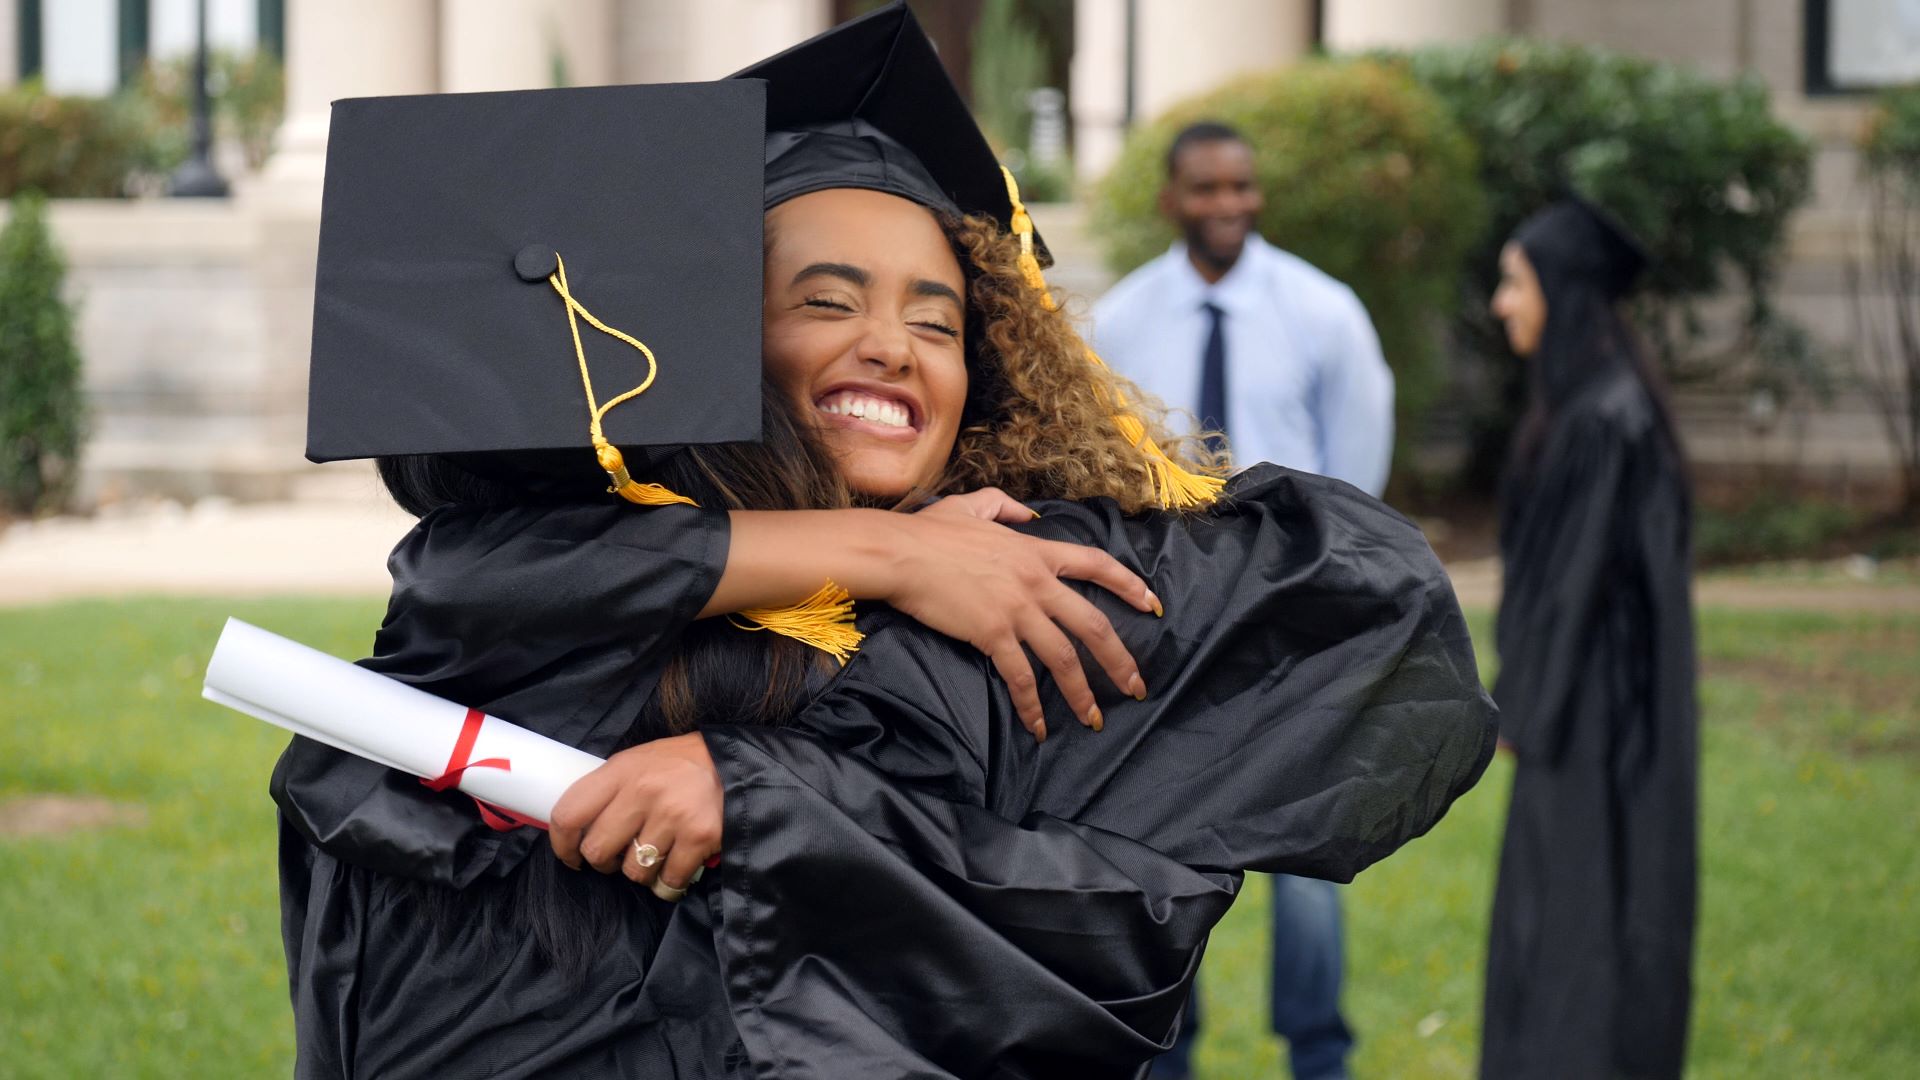 Woman with graduation gown and cap embracing another graduate